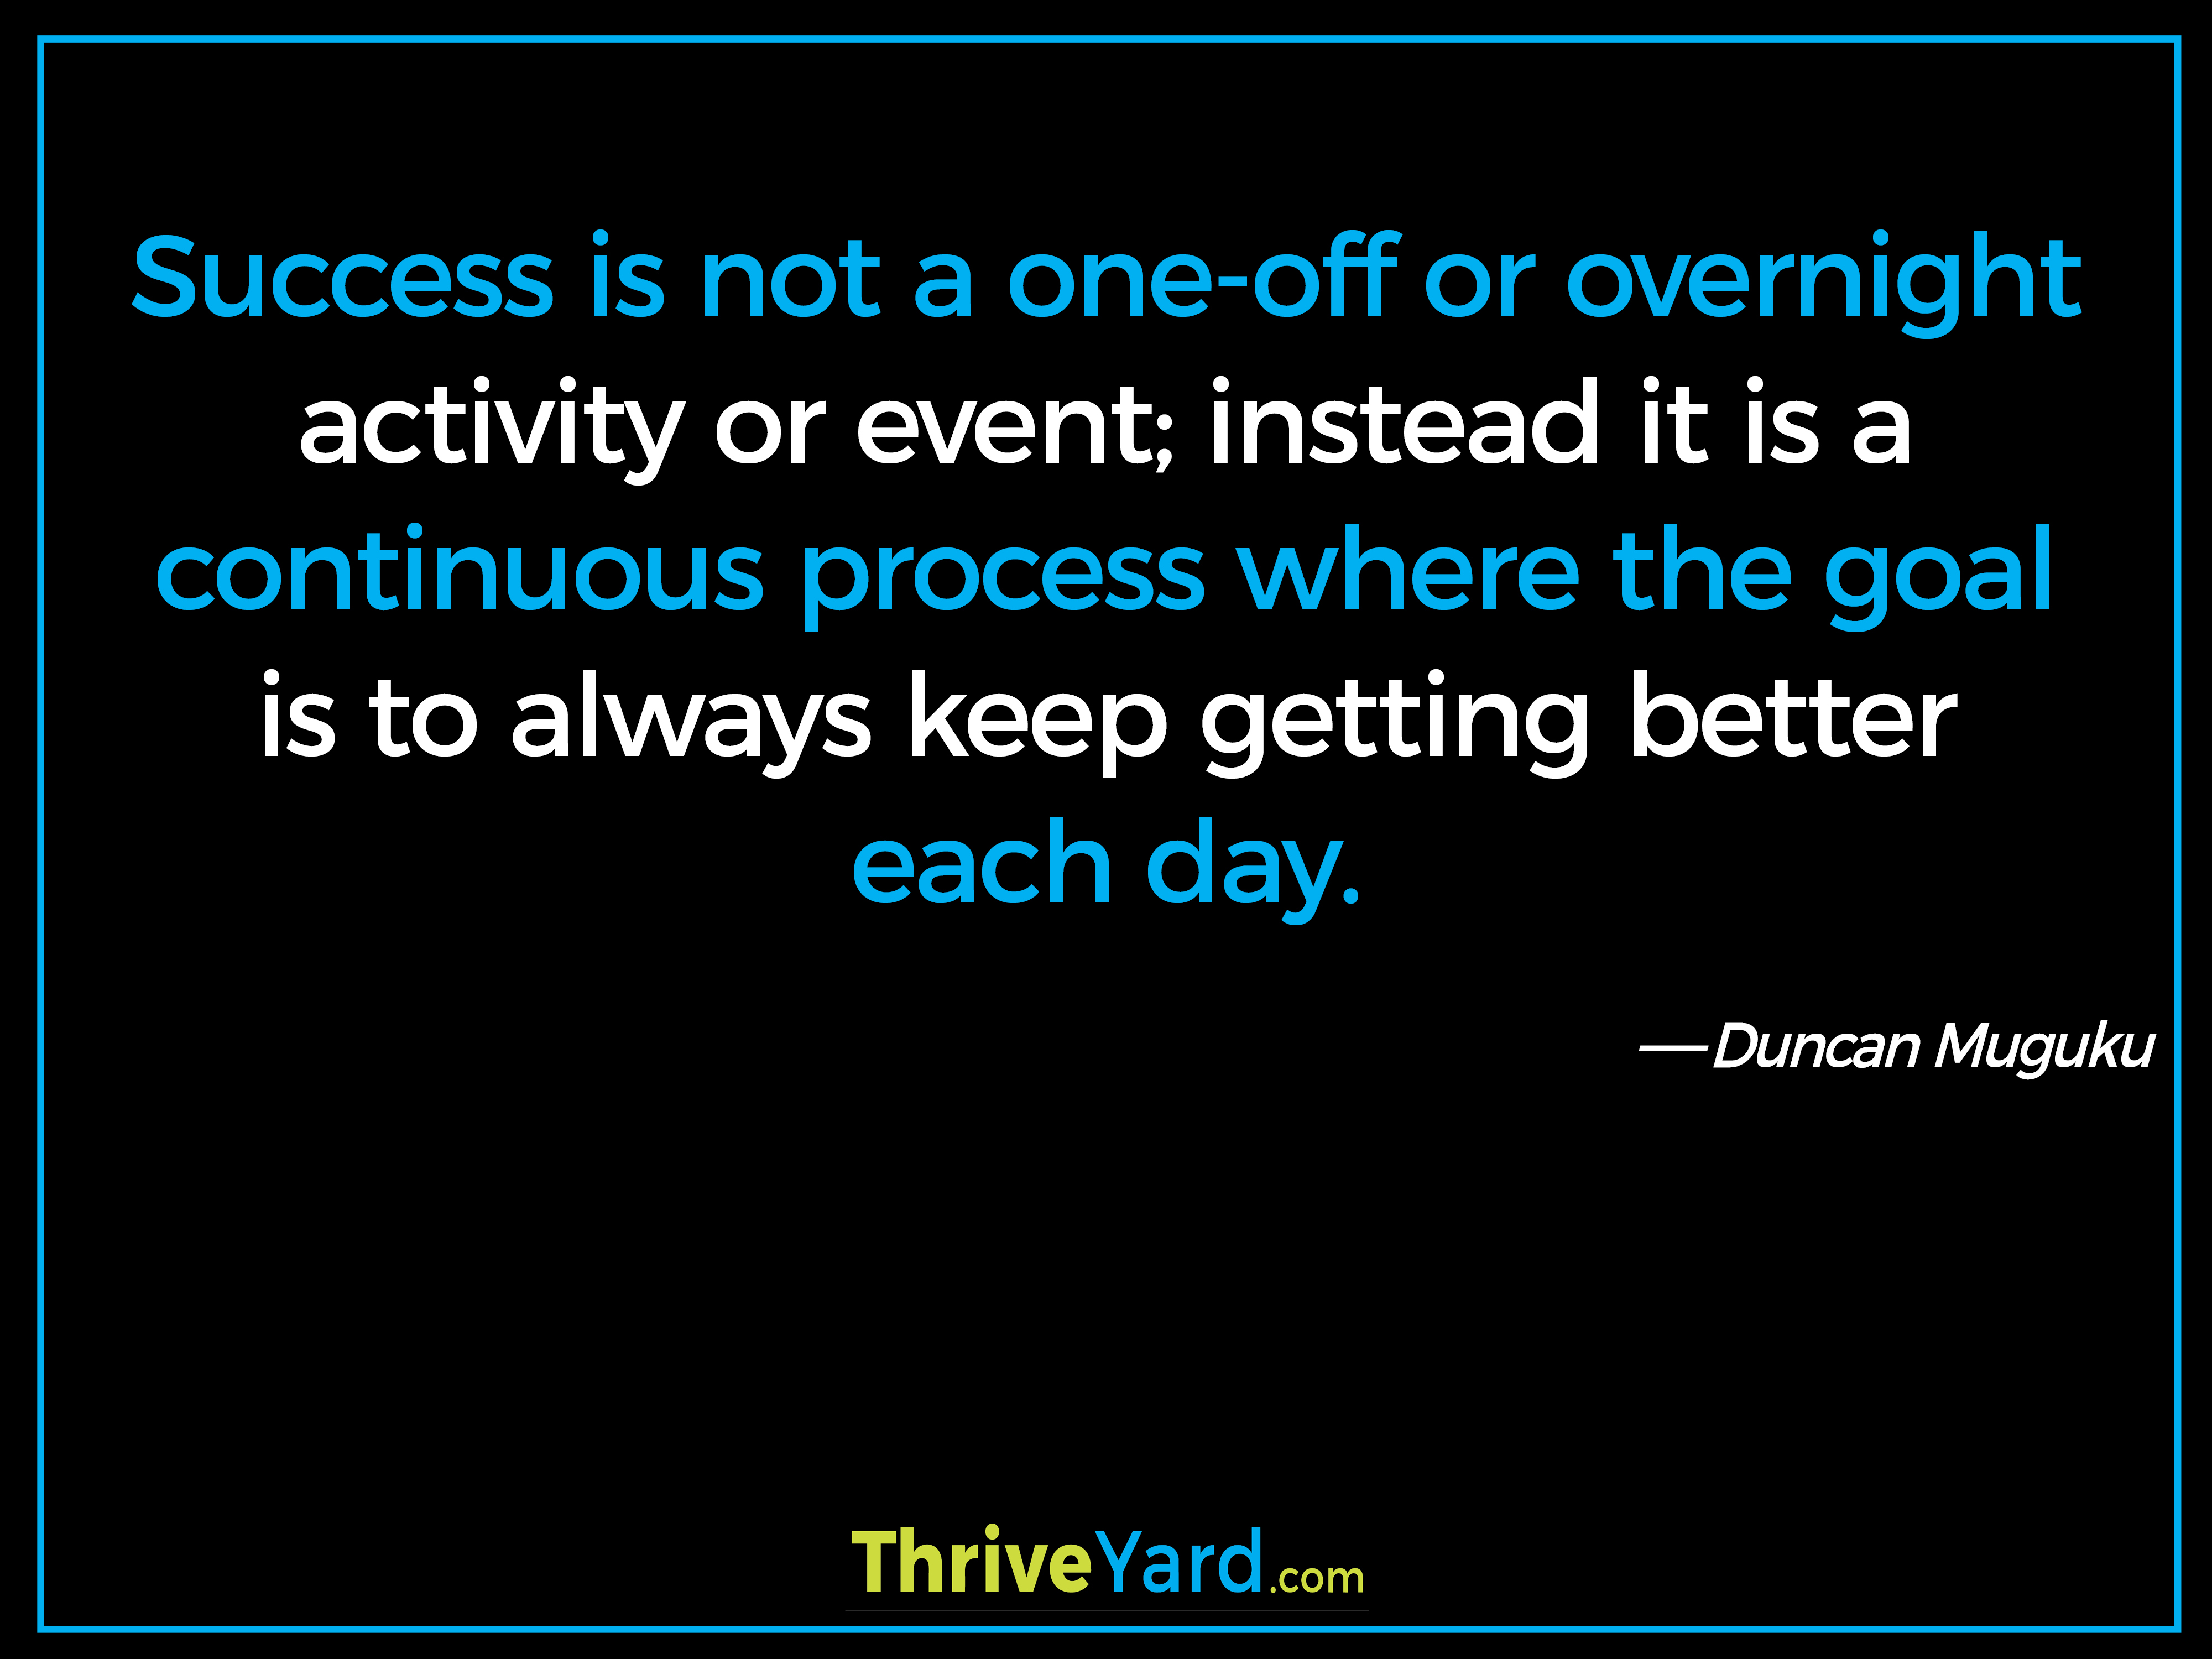 Success is not a one-off or overnight activity or event; instead it is a continuous process where the goal is to always keep getting better each day. - Duncan Muguku